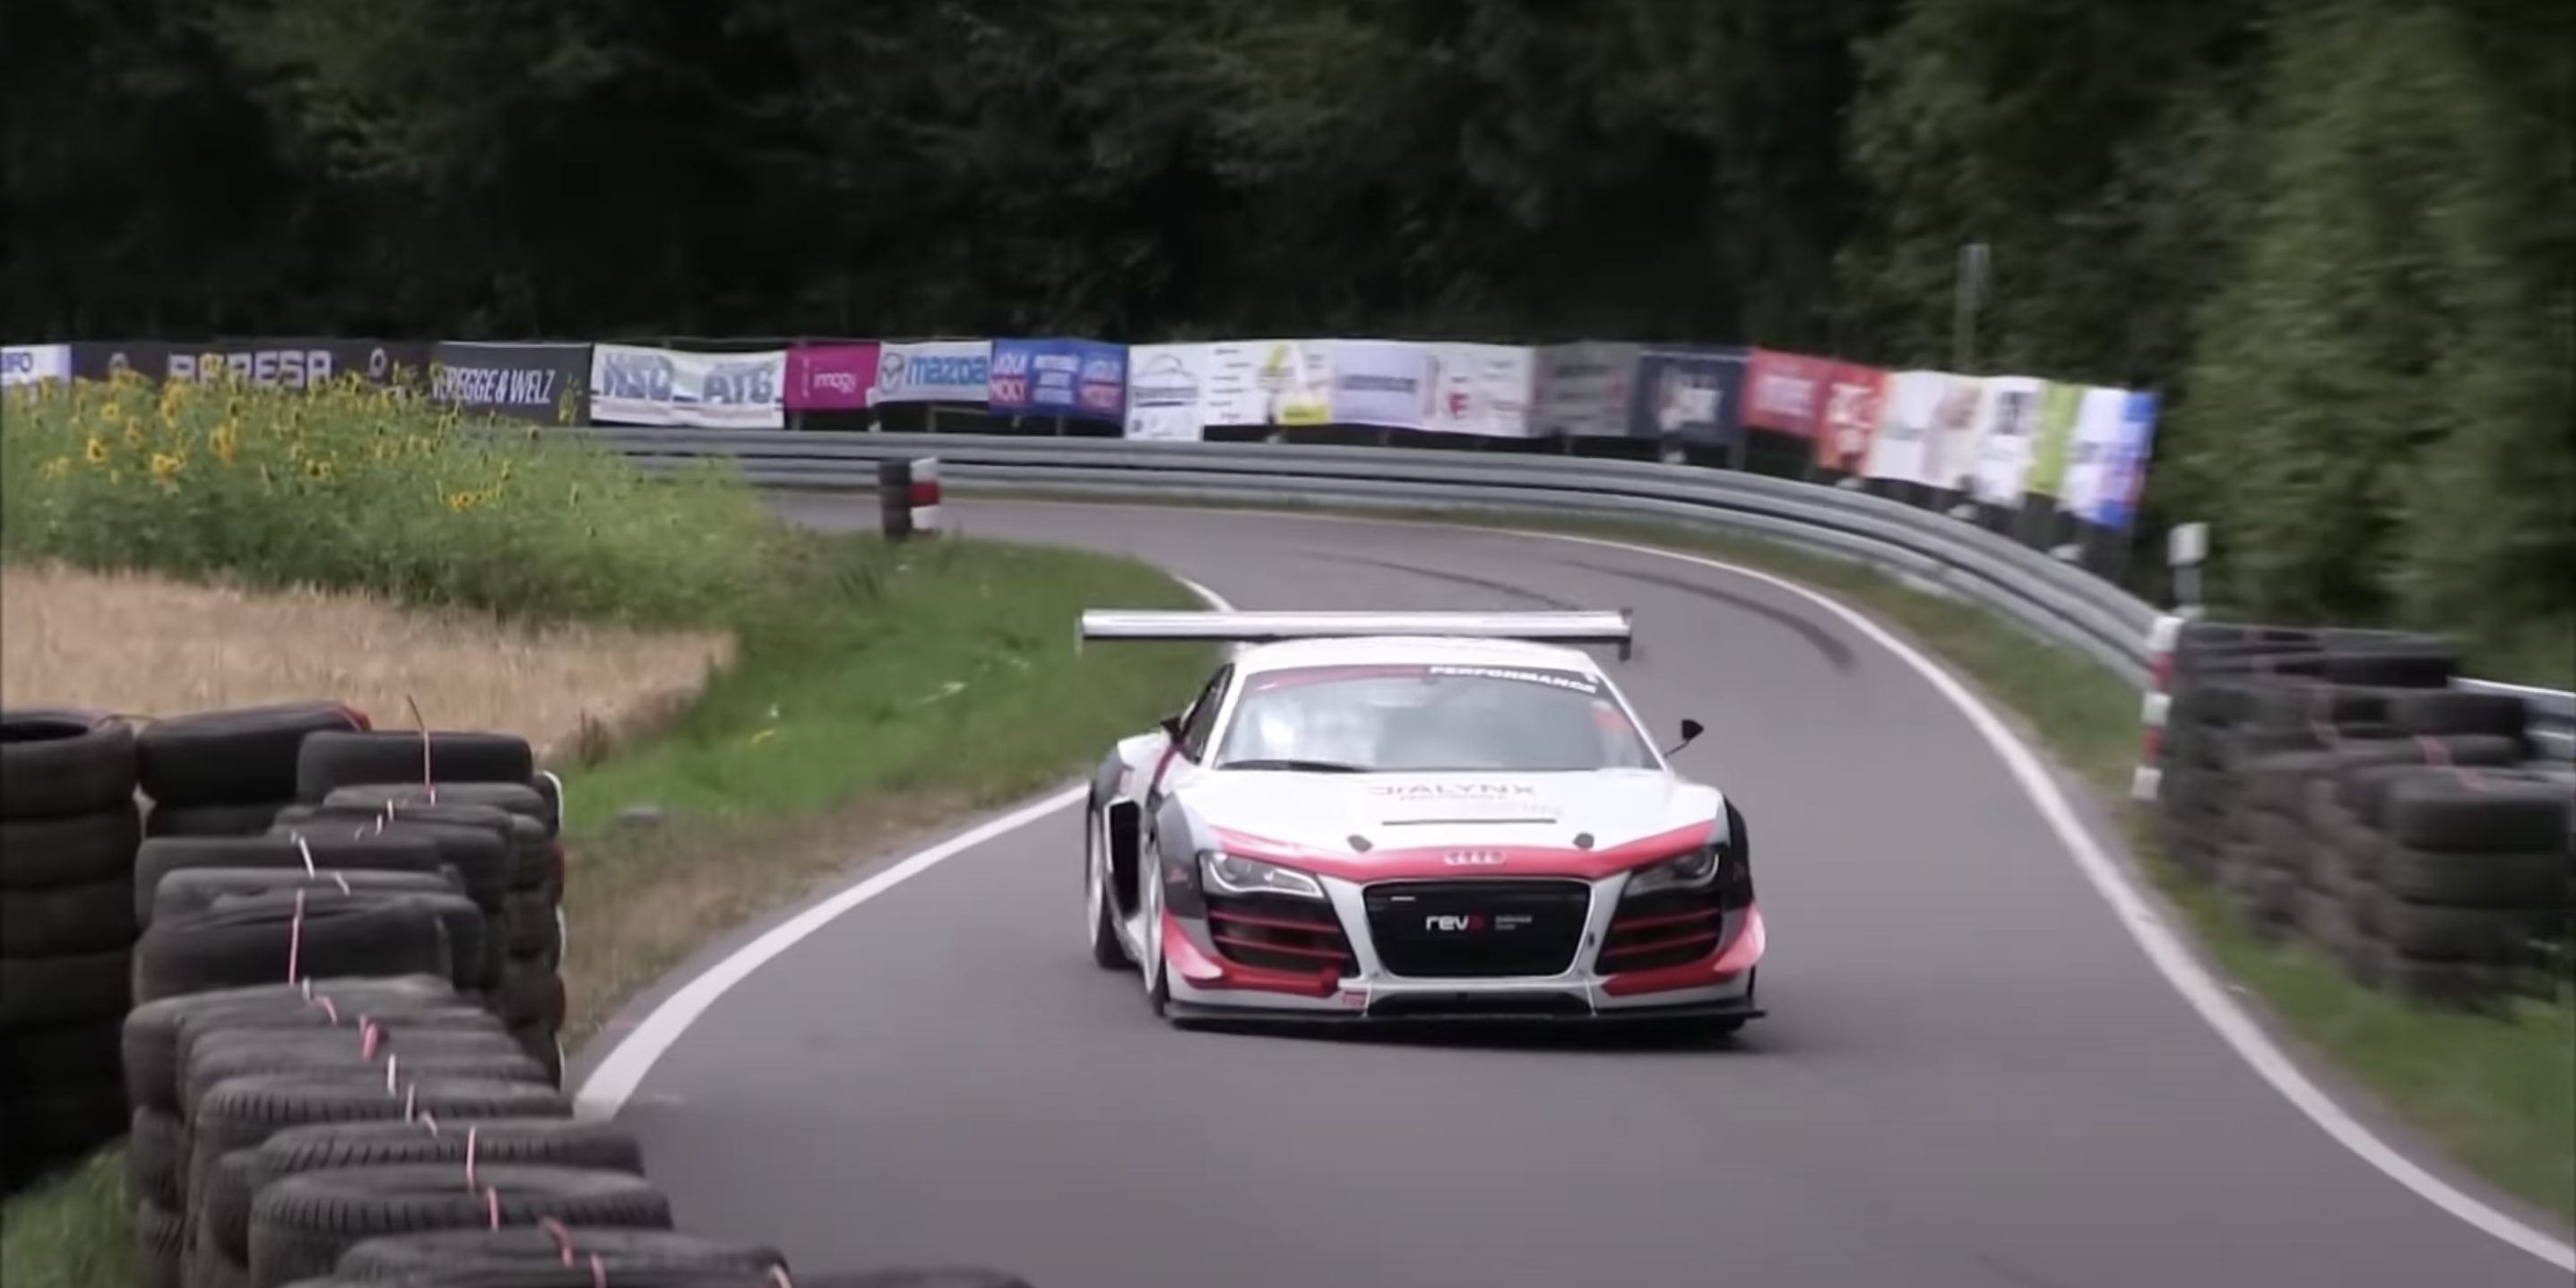 This Wild Audi R8 Race Car Is Missing Six Cylinders